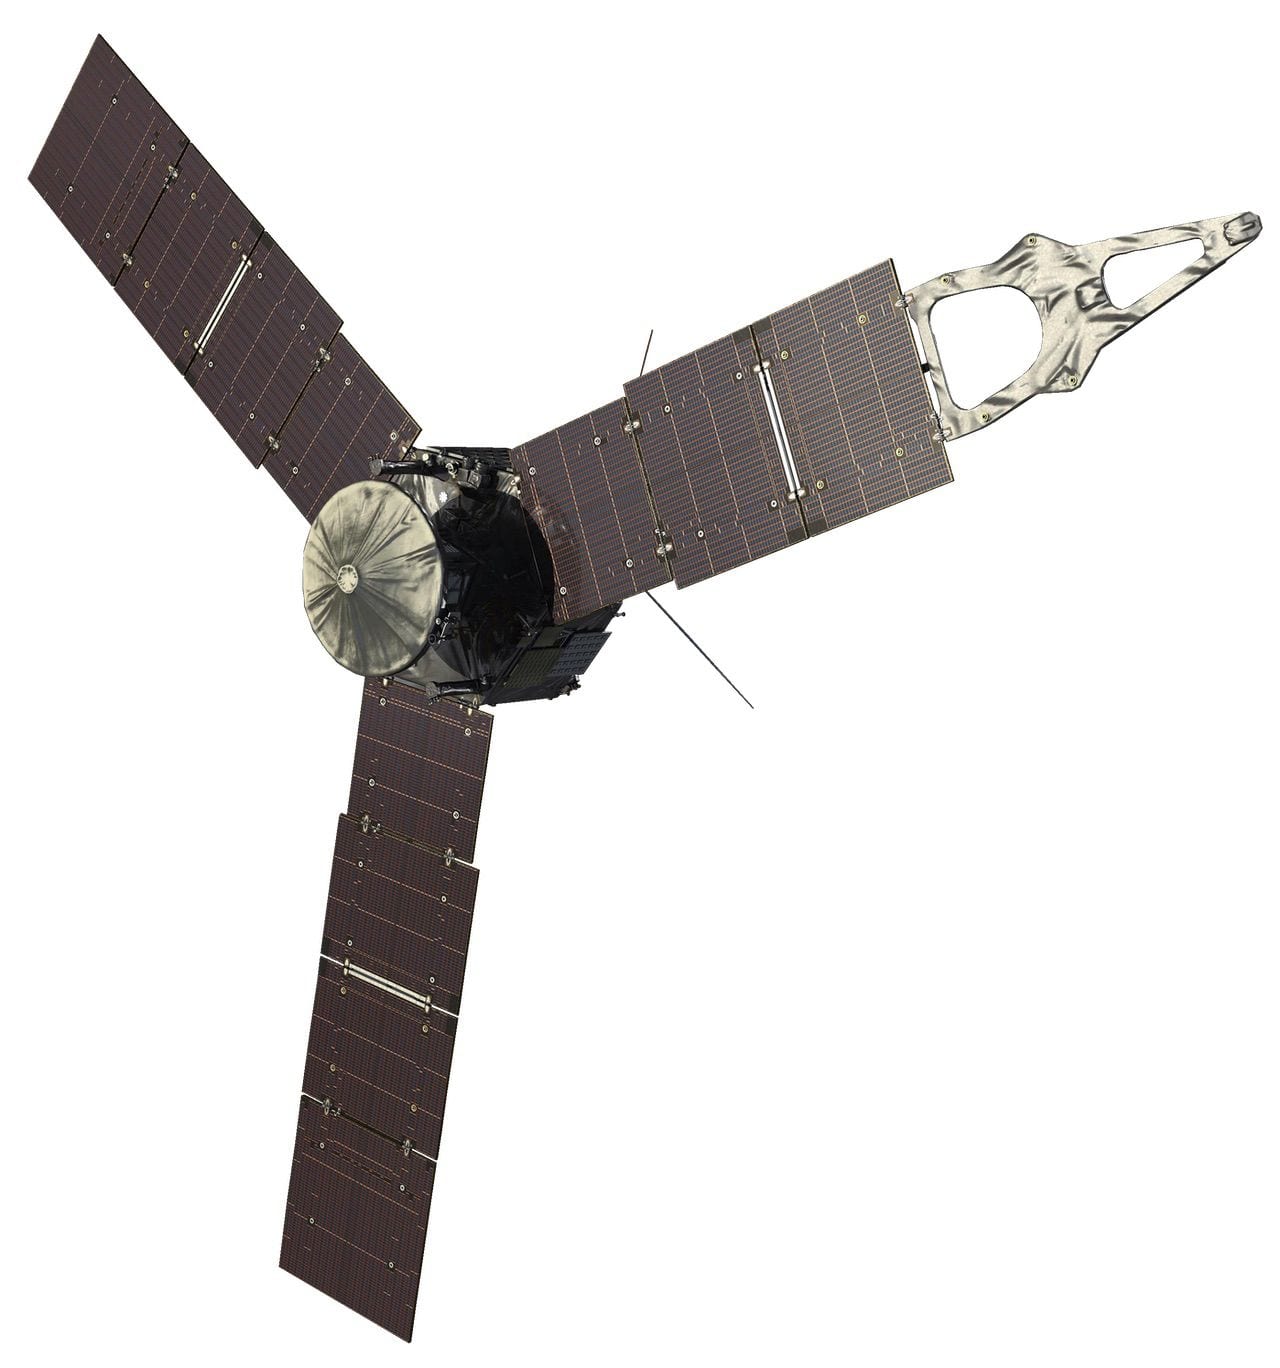 The Juno spacecraft, currently orbiting Jupiter. The three solar panels provide power and stabilization to the spacecraft. Artists rendering via NASA.